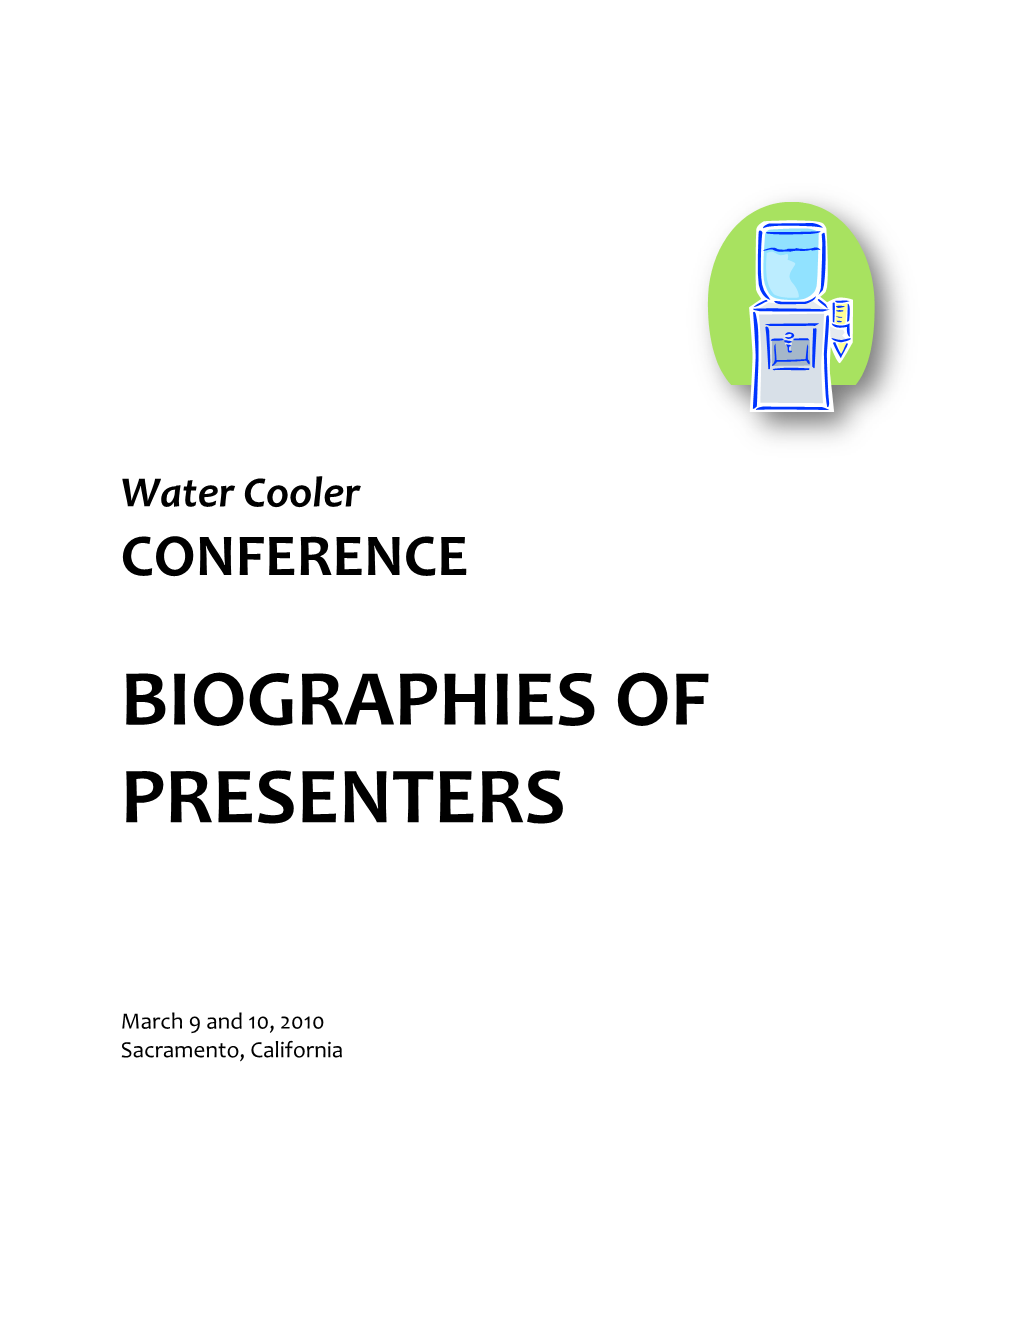 Water Cooler Conference Speakers' Biographies